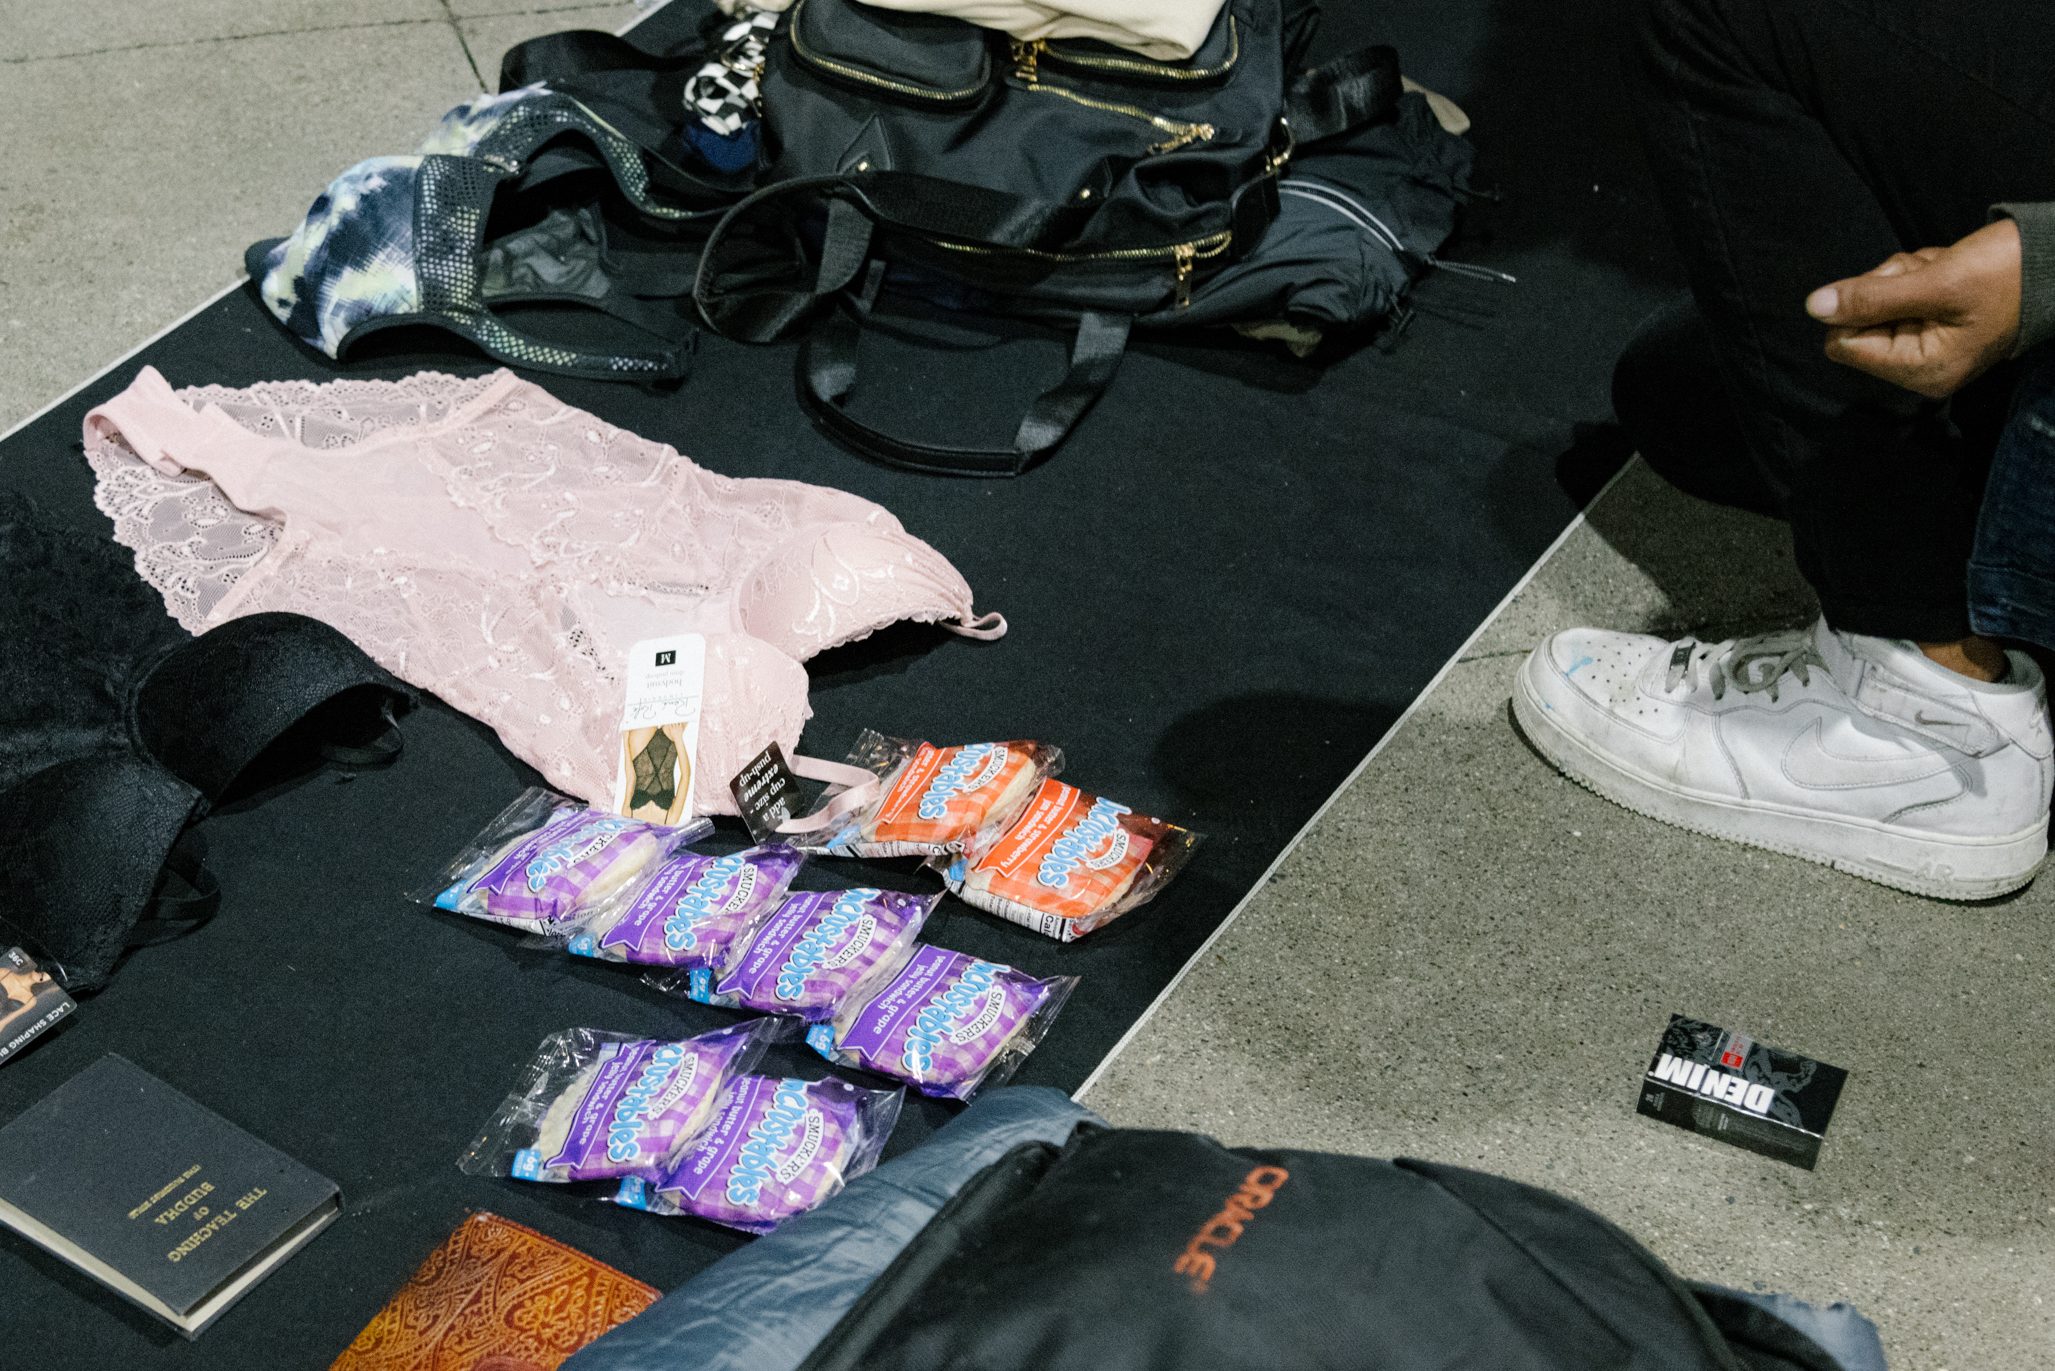 A collection of items on a mat: clothing, bags, and packets, with a person seated at the edge.